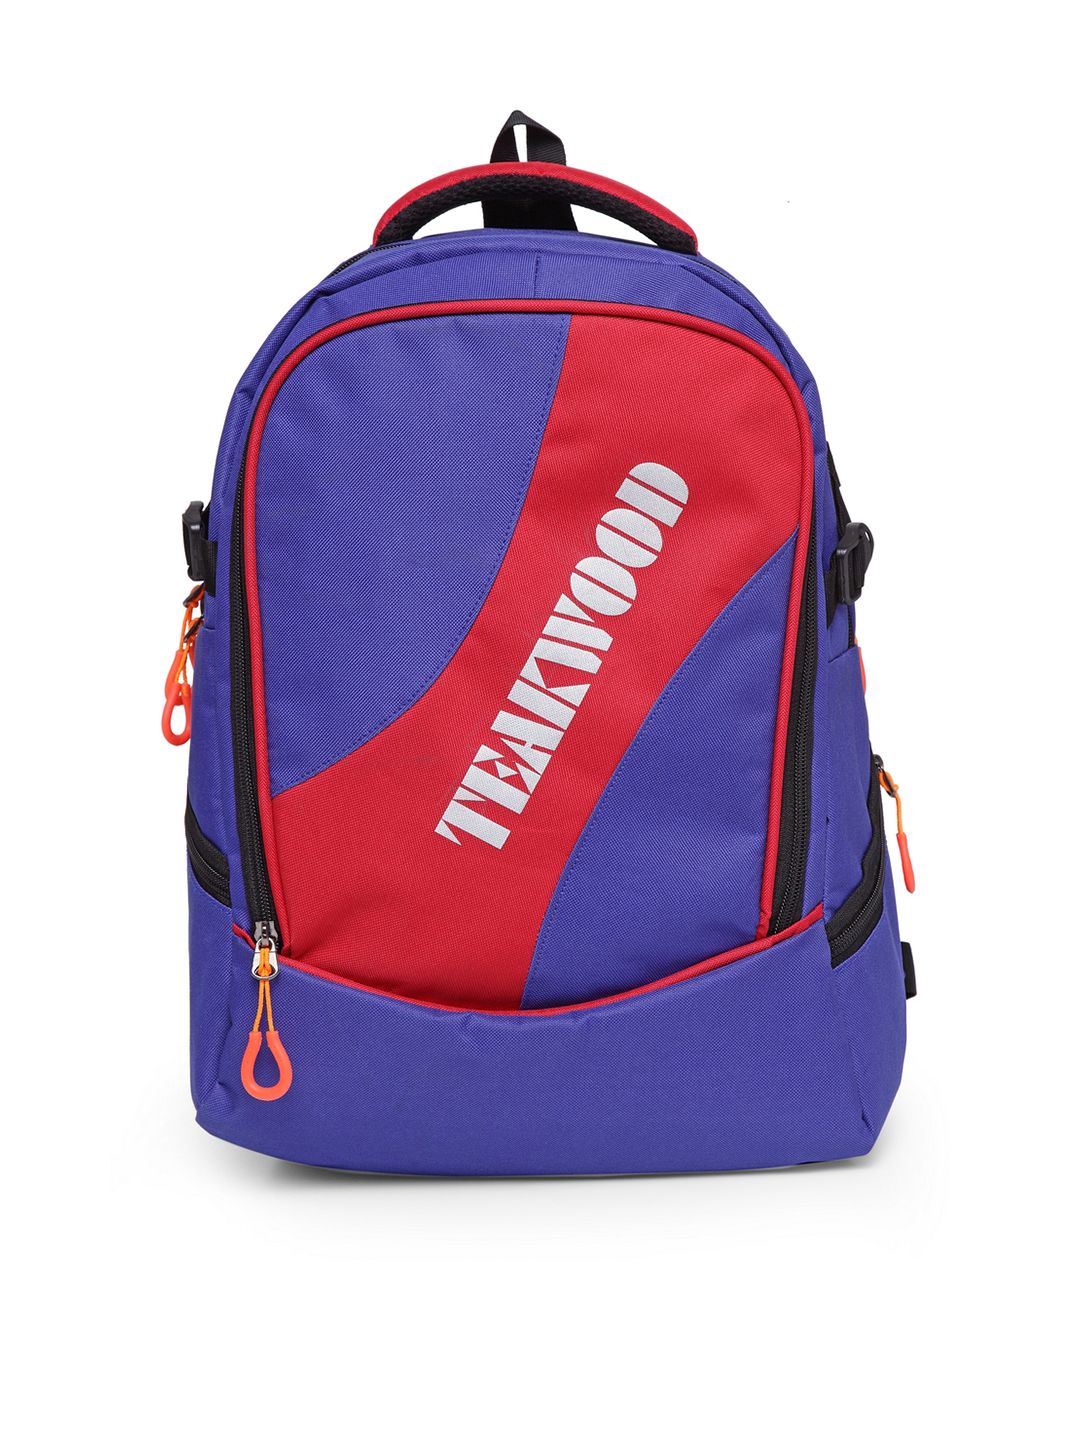 Teakwood Leathers Unisex Violet & Red Colourblocked Backpack Price in India